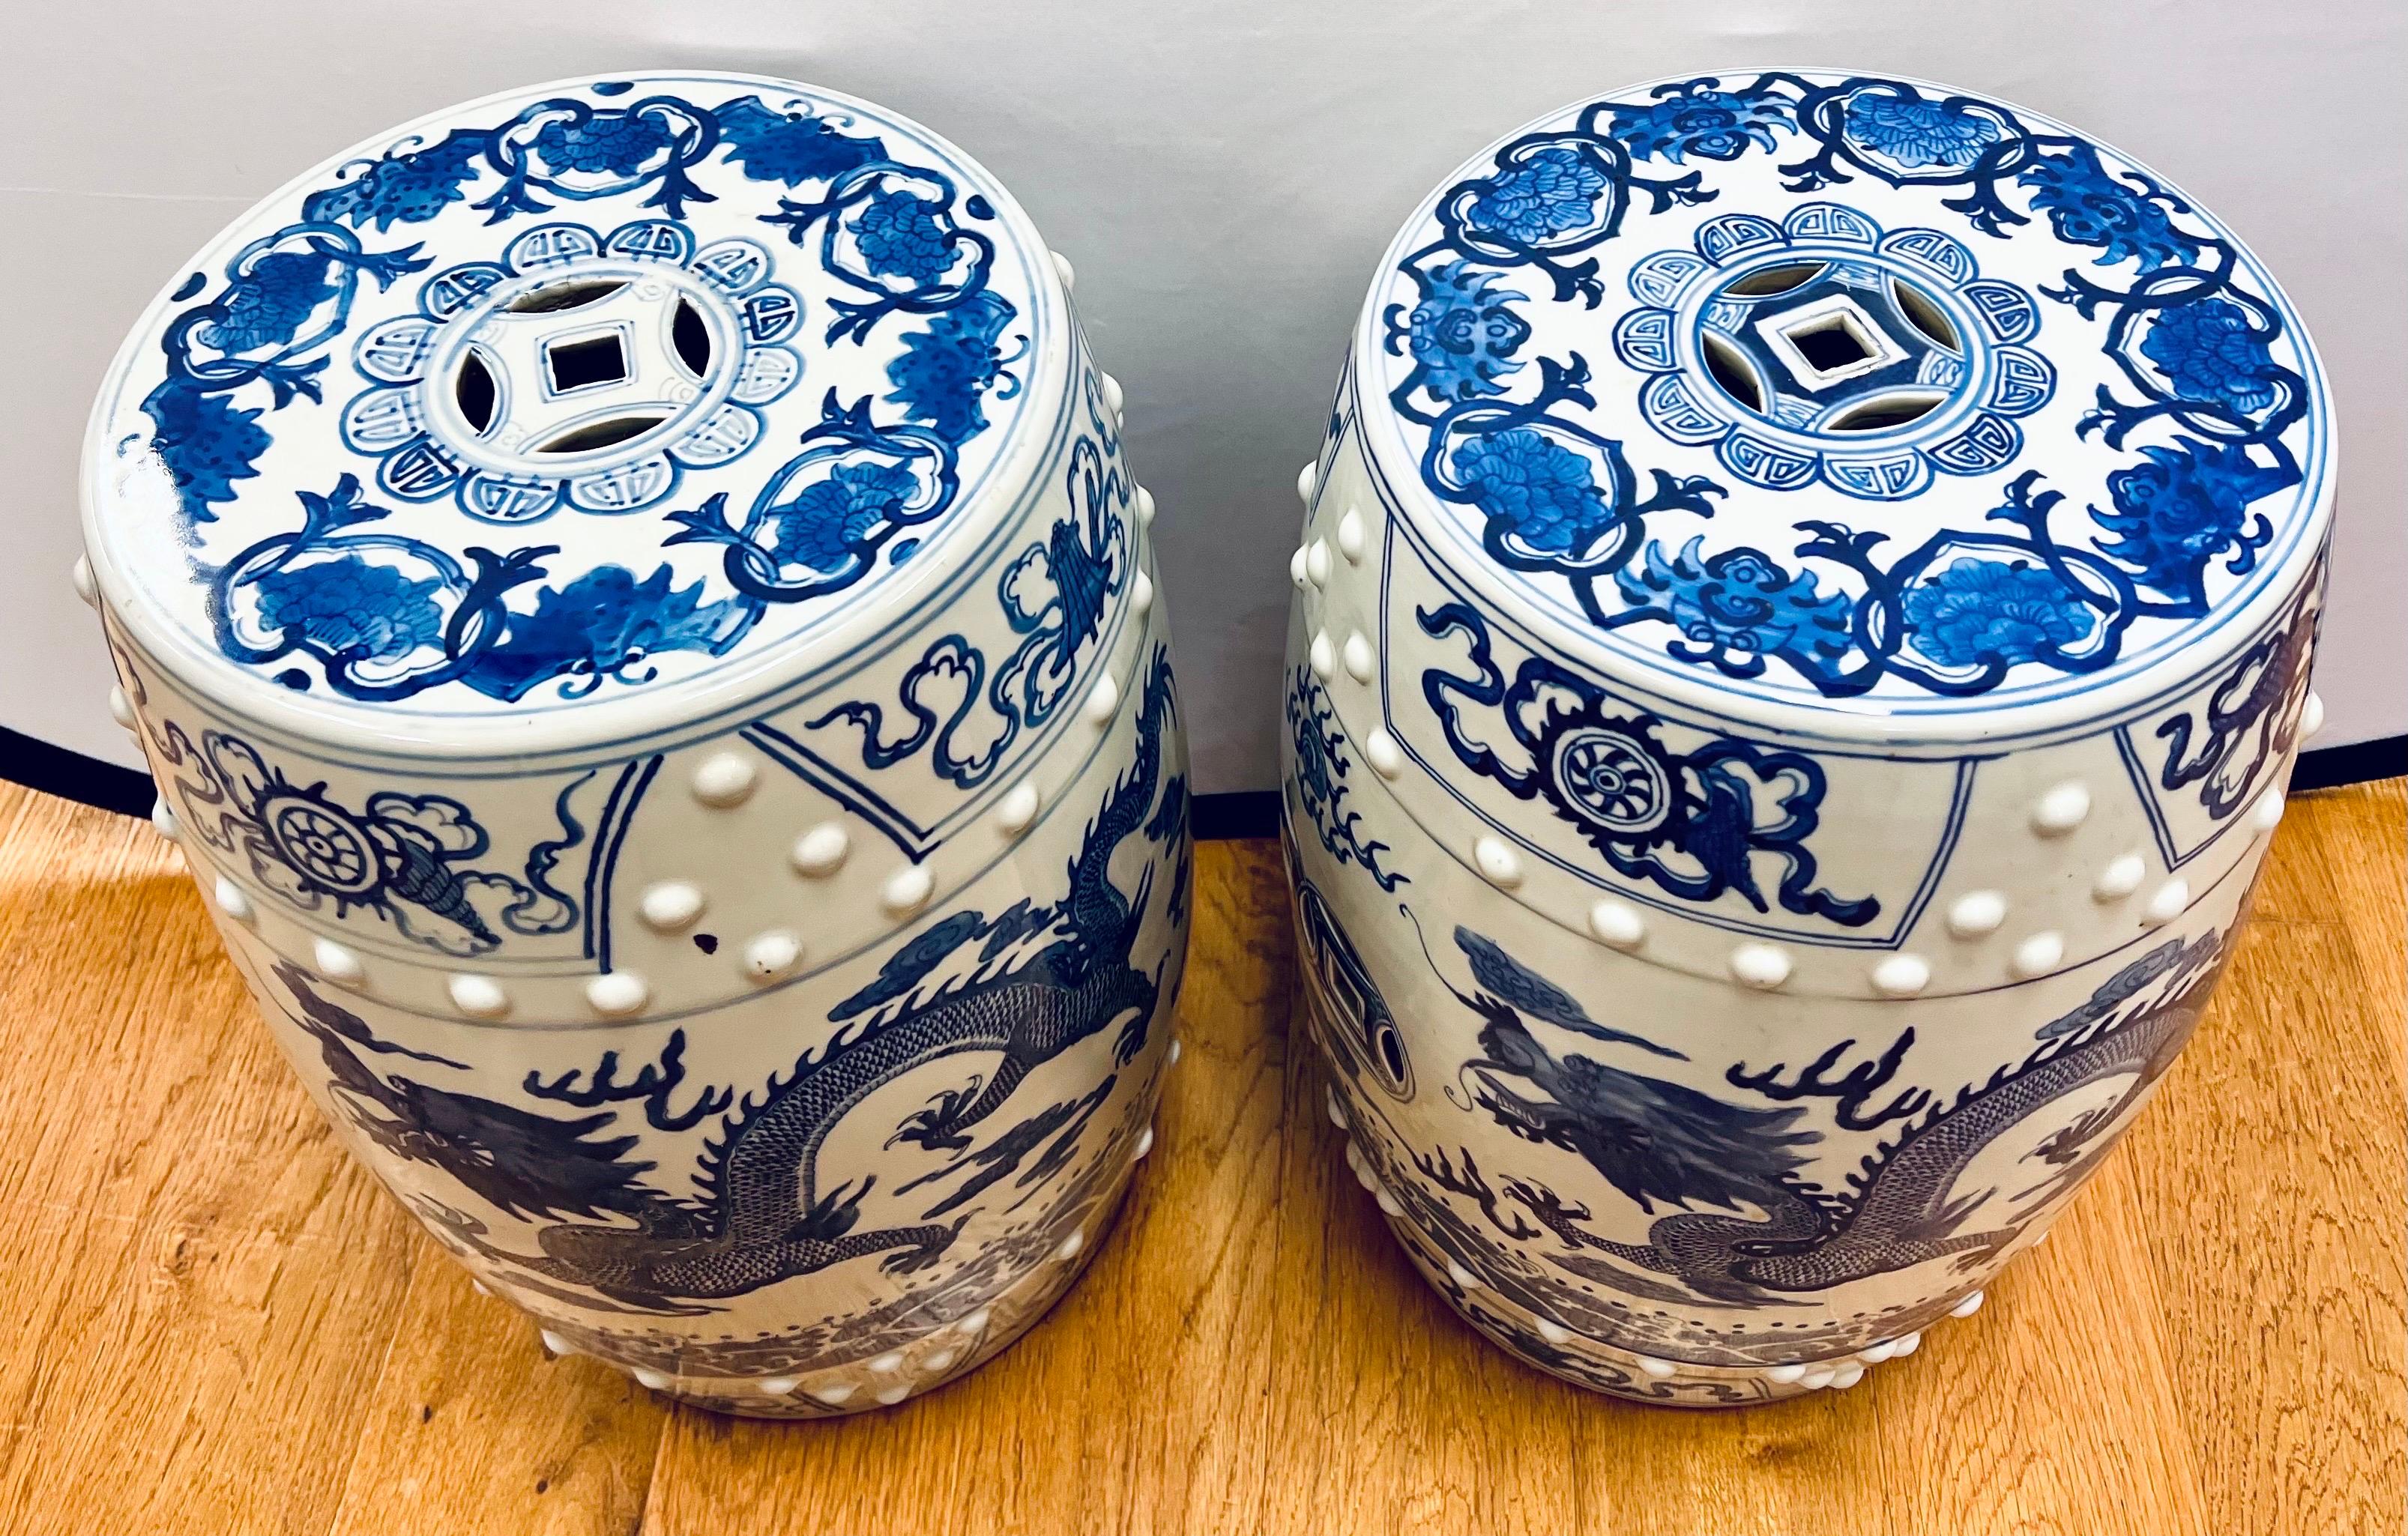 Stunning pair of Chinese blue and white porcelain garden stools with intricate hand painted motif of dragons, fish and flowers.  Pierced detail at top and sides.  Each piece is incised with artist's number.  Can also be used as side or drink tables.